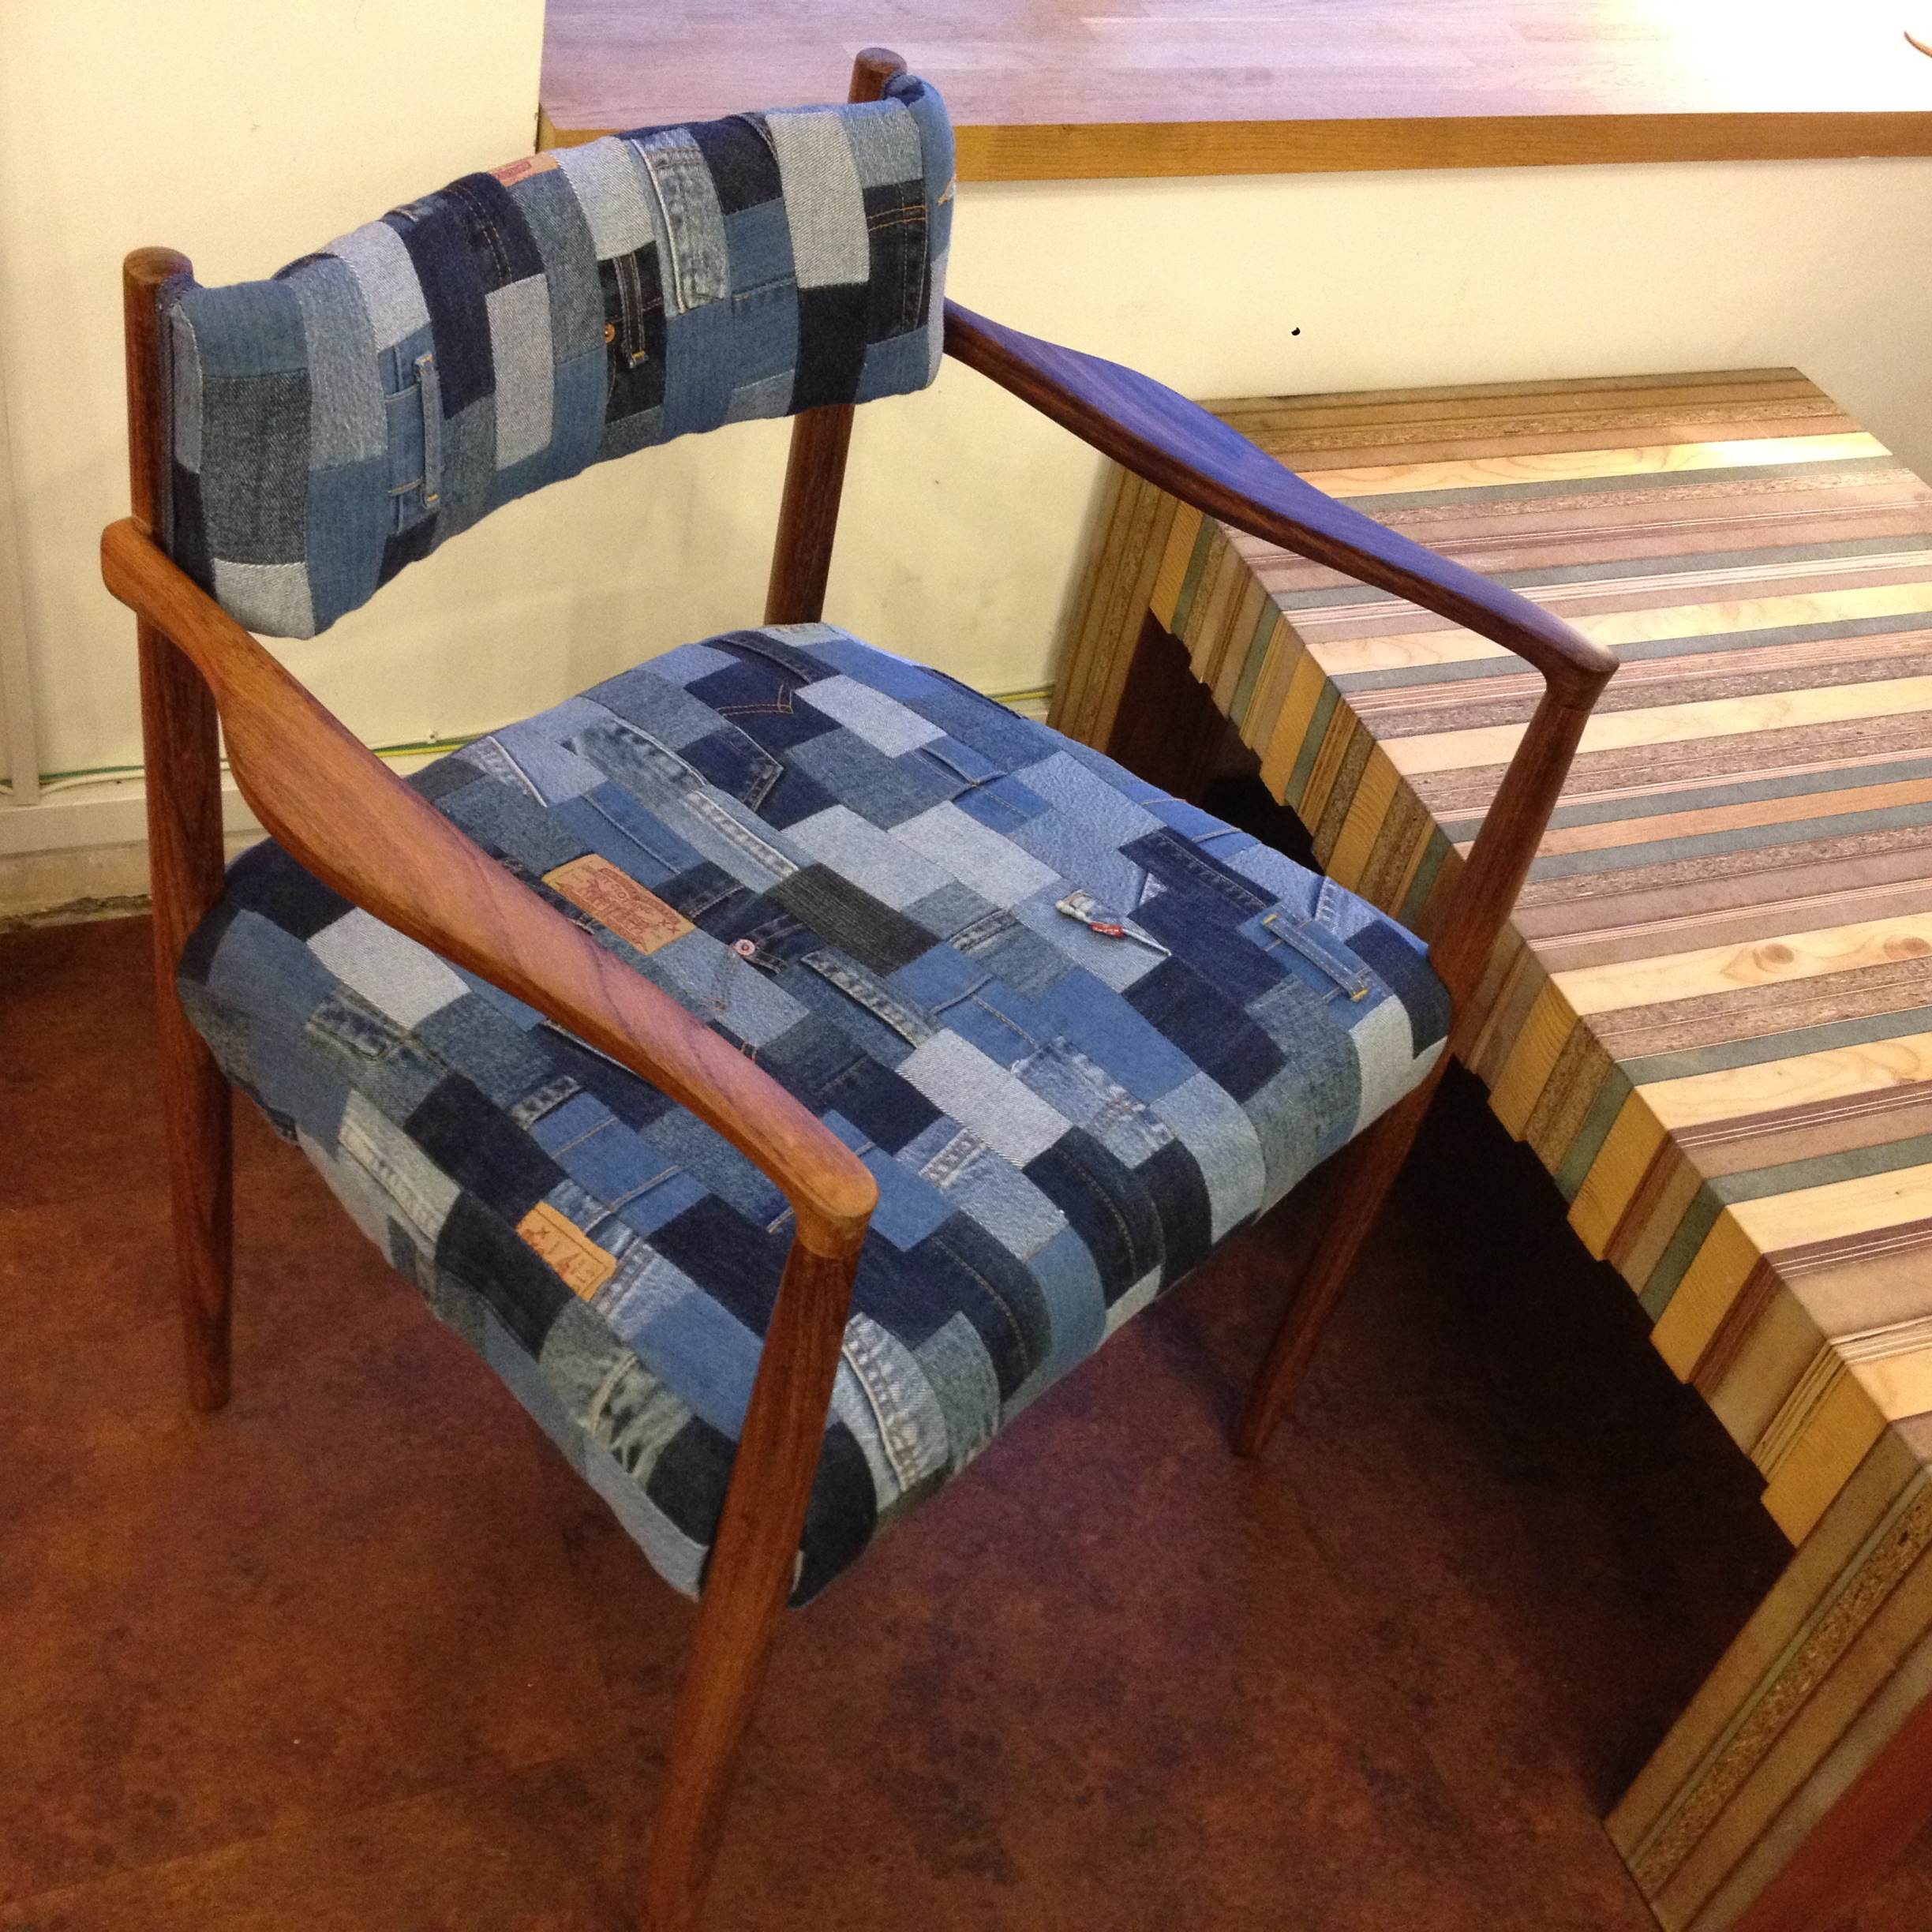 This Chair is upcycled in London using a well built, quality chair using old jeans. The chair is ready for another lifetime. Made by Emma Phelps.